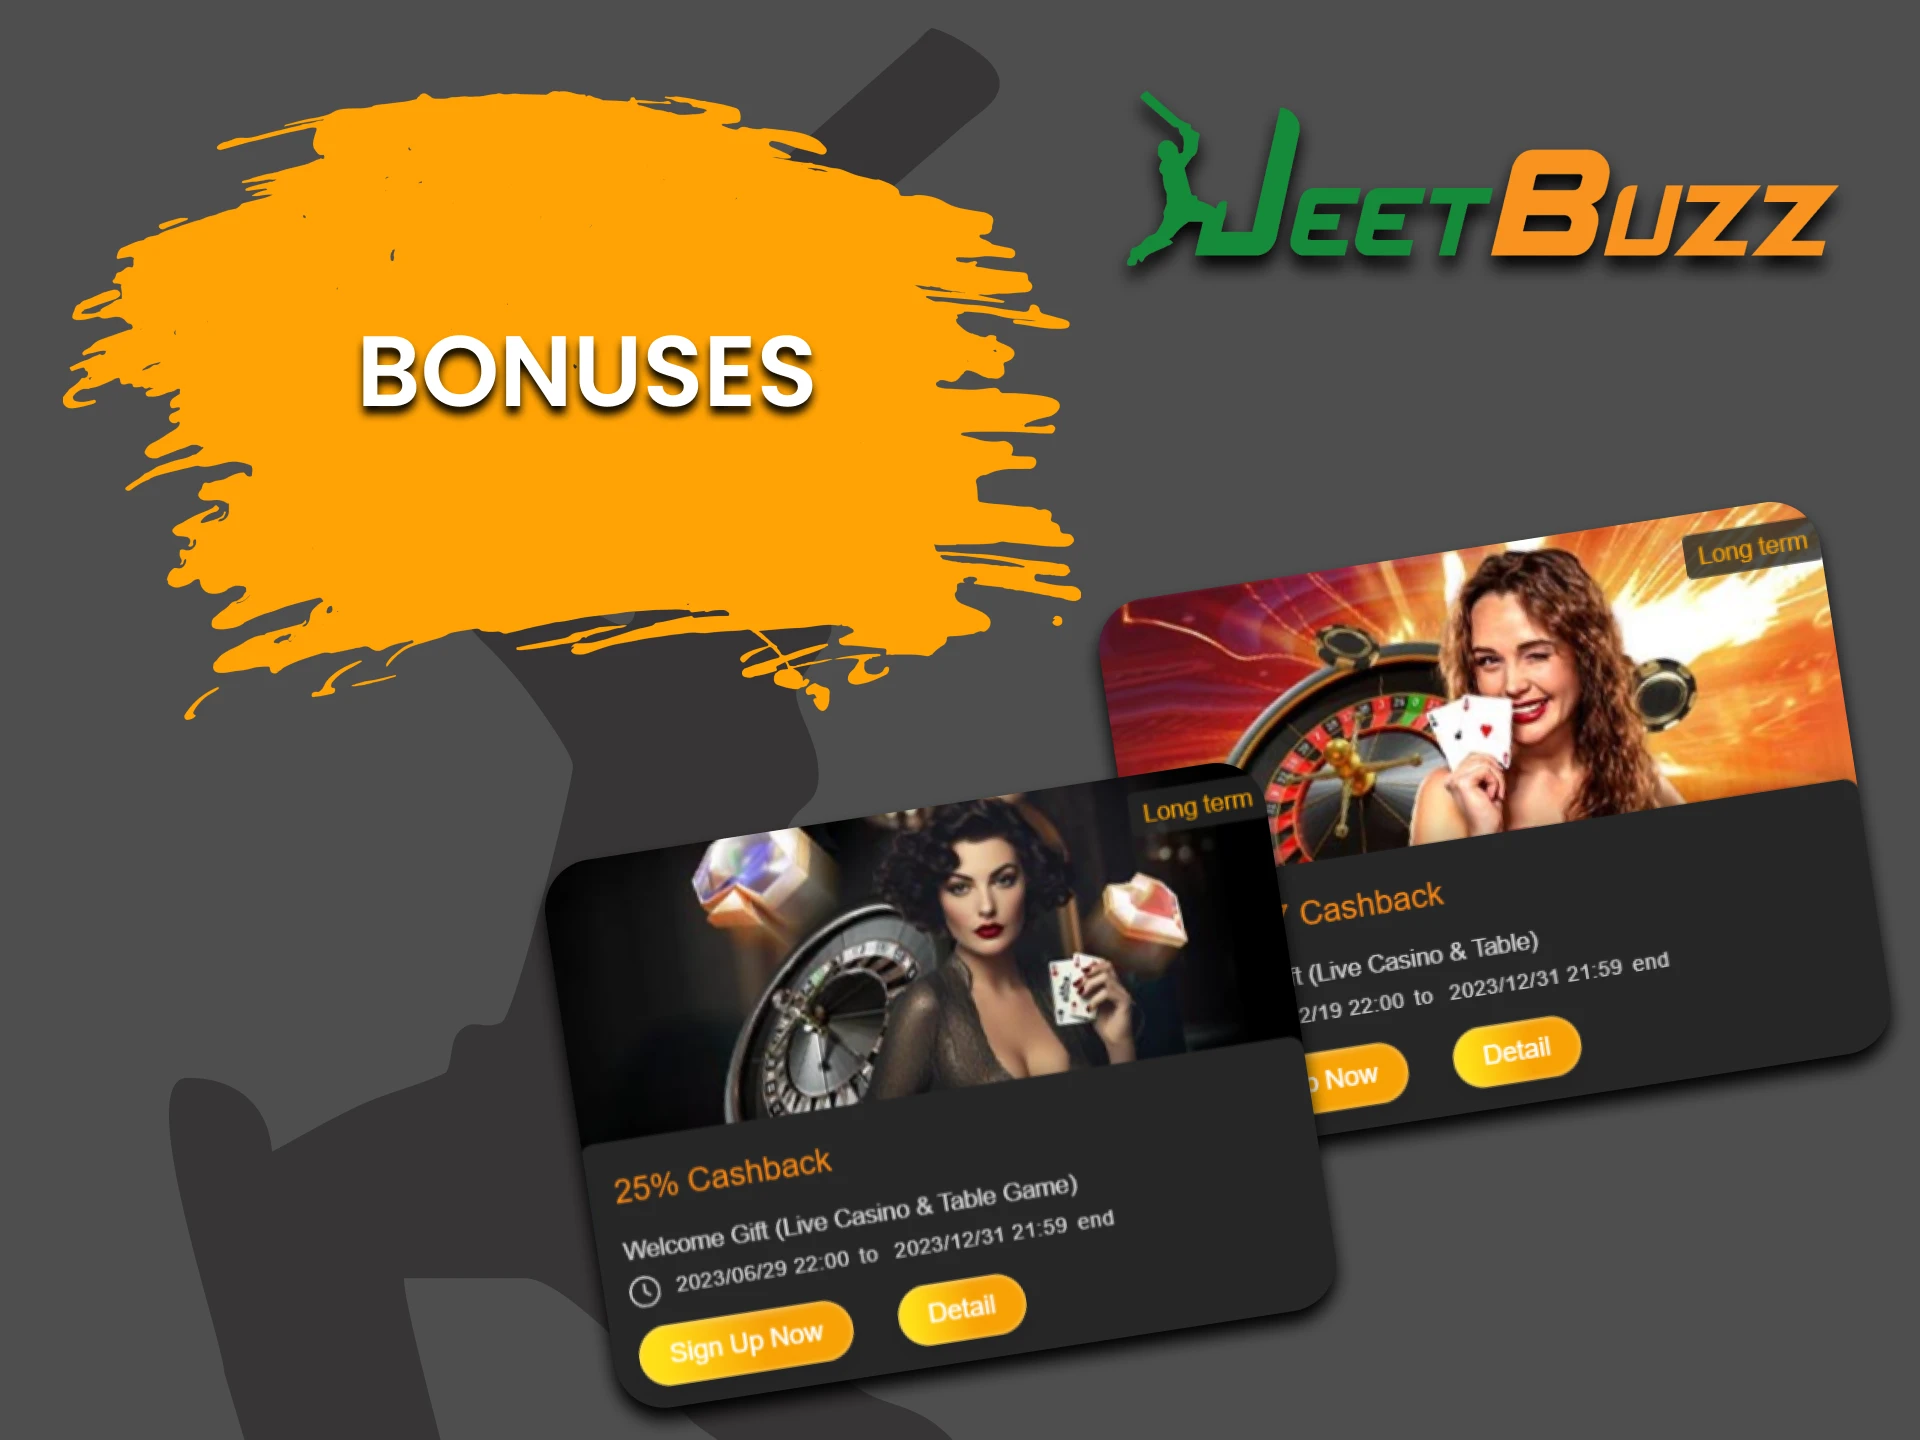 JeetBuzz gives bonuses for table games.